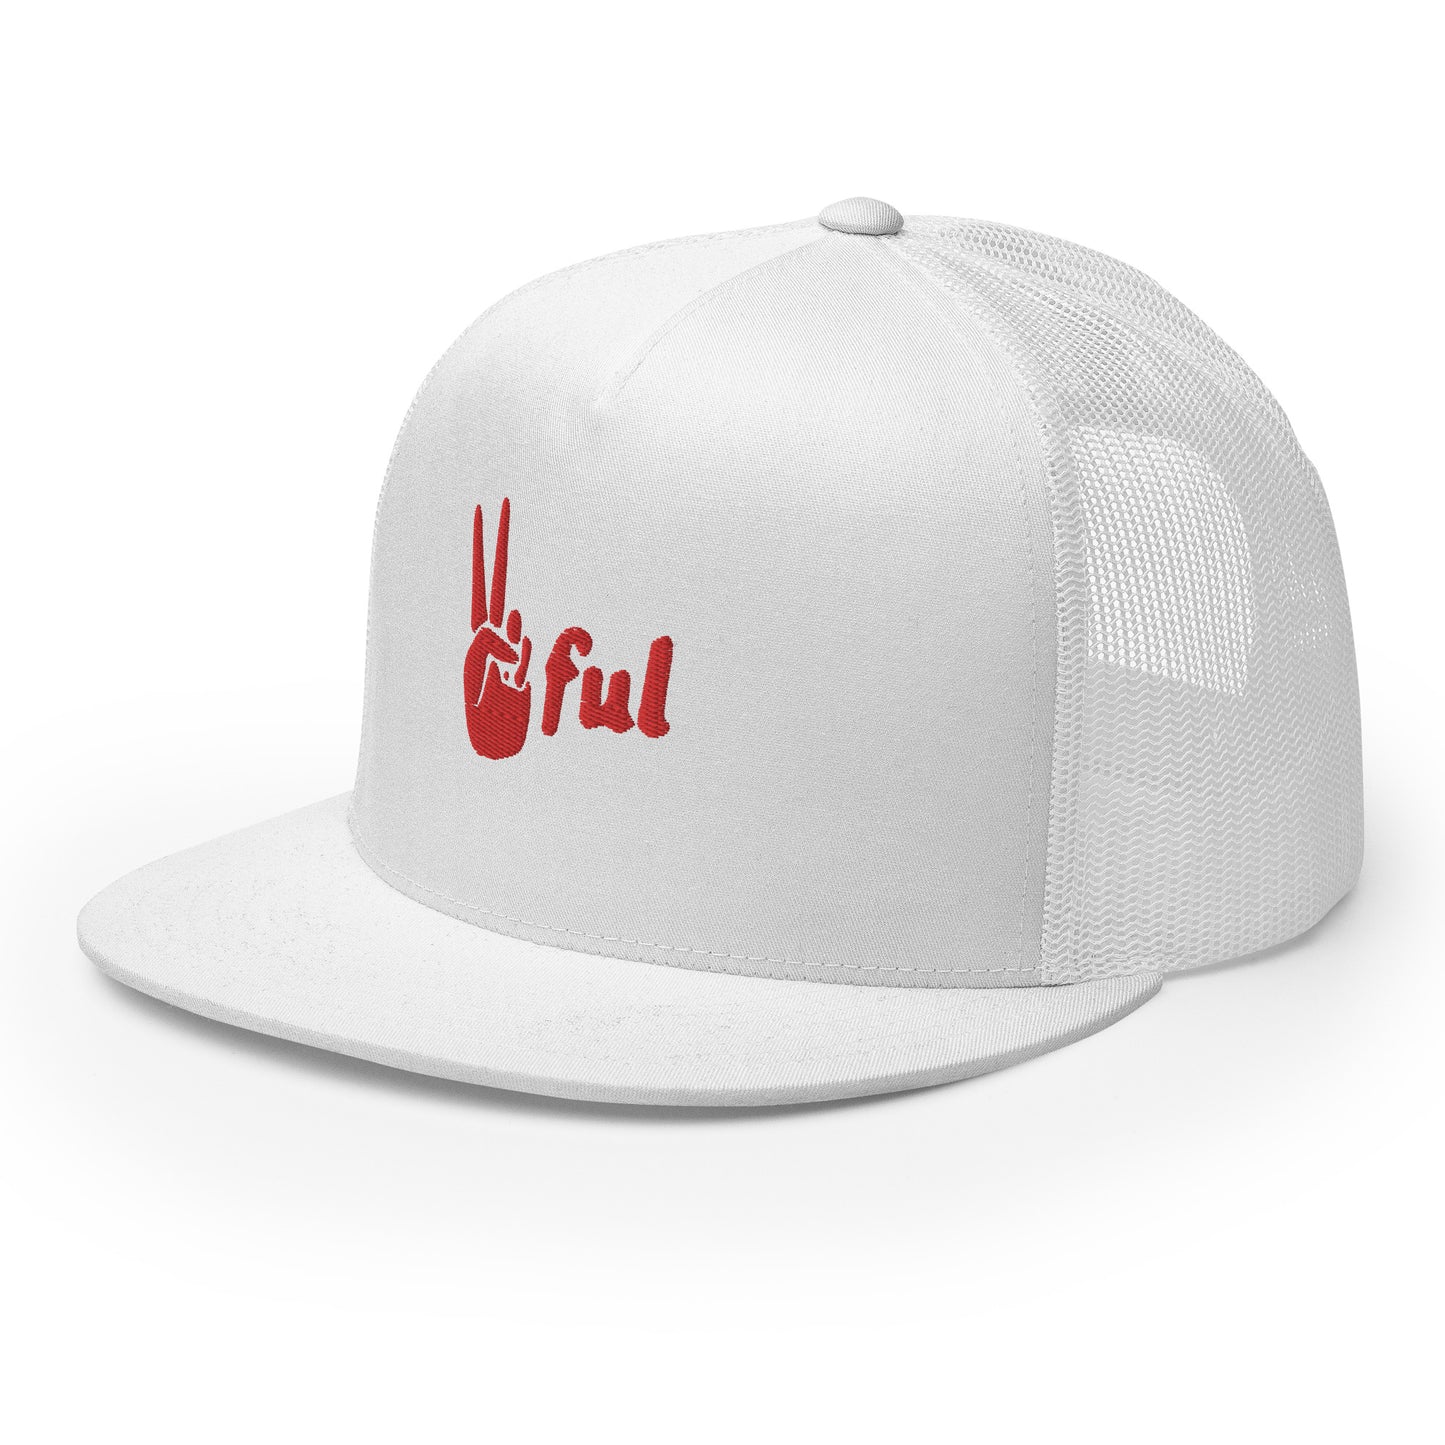 Peaceful Trucker Cap Red Embroidered